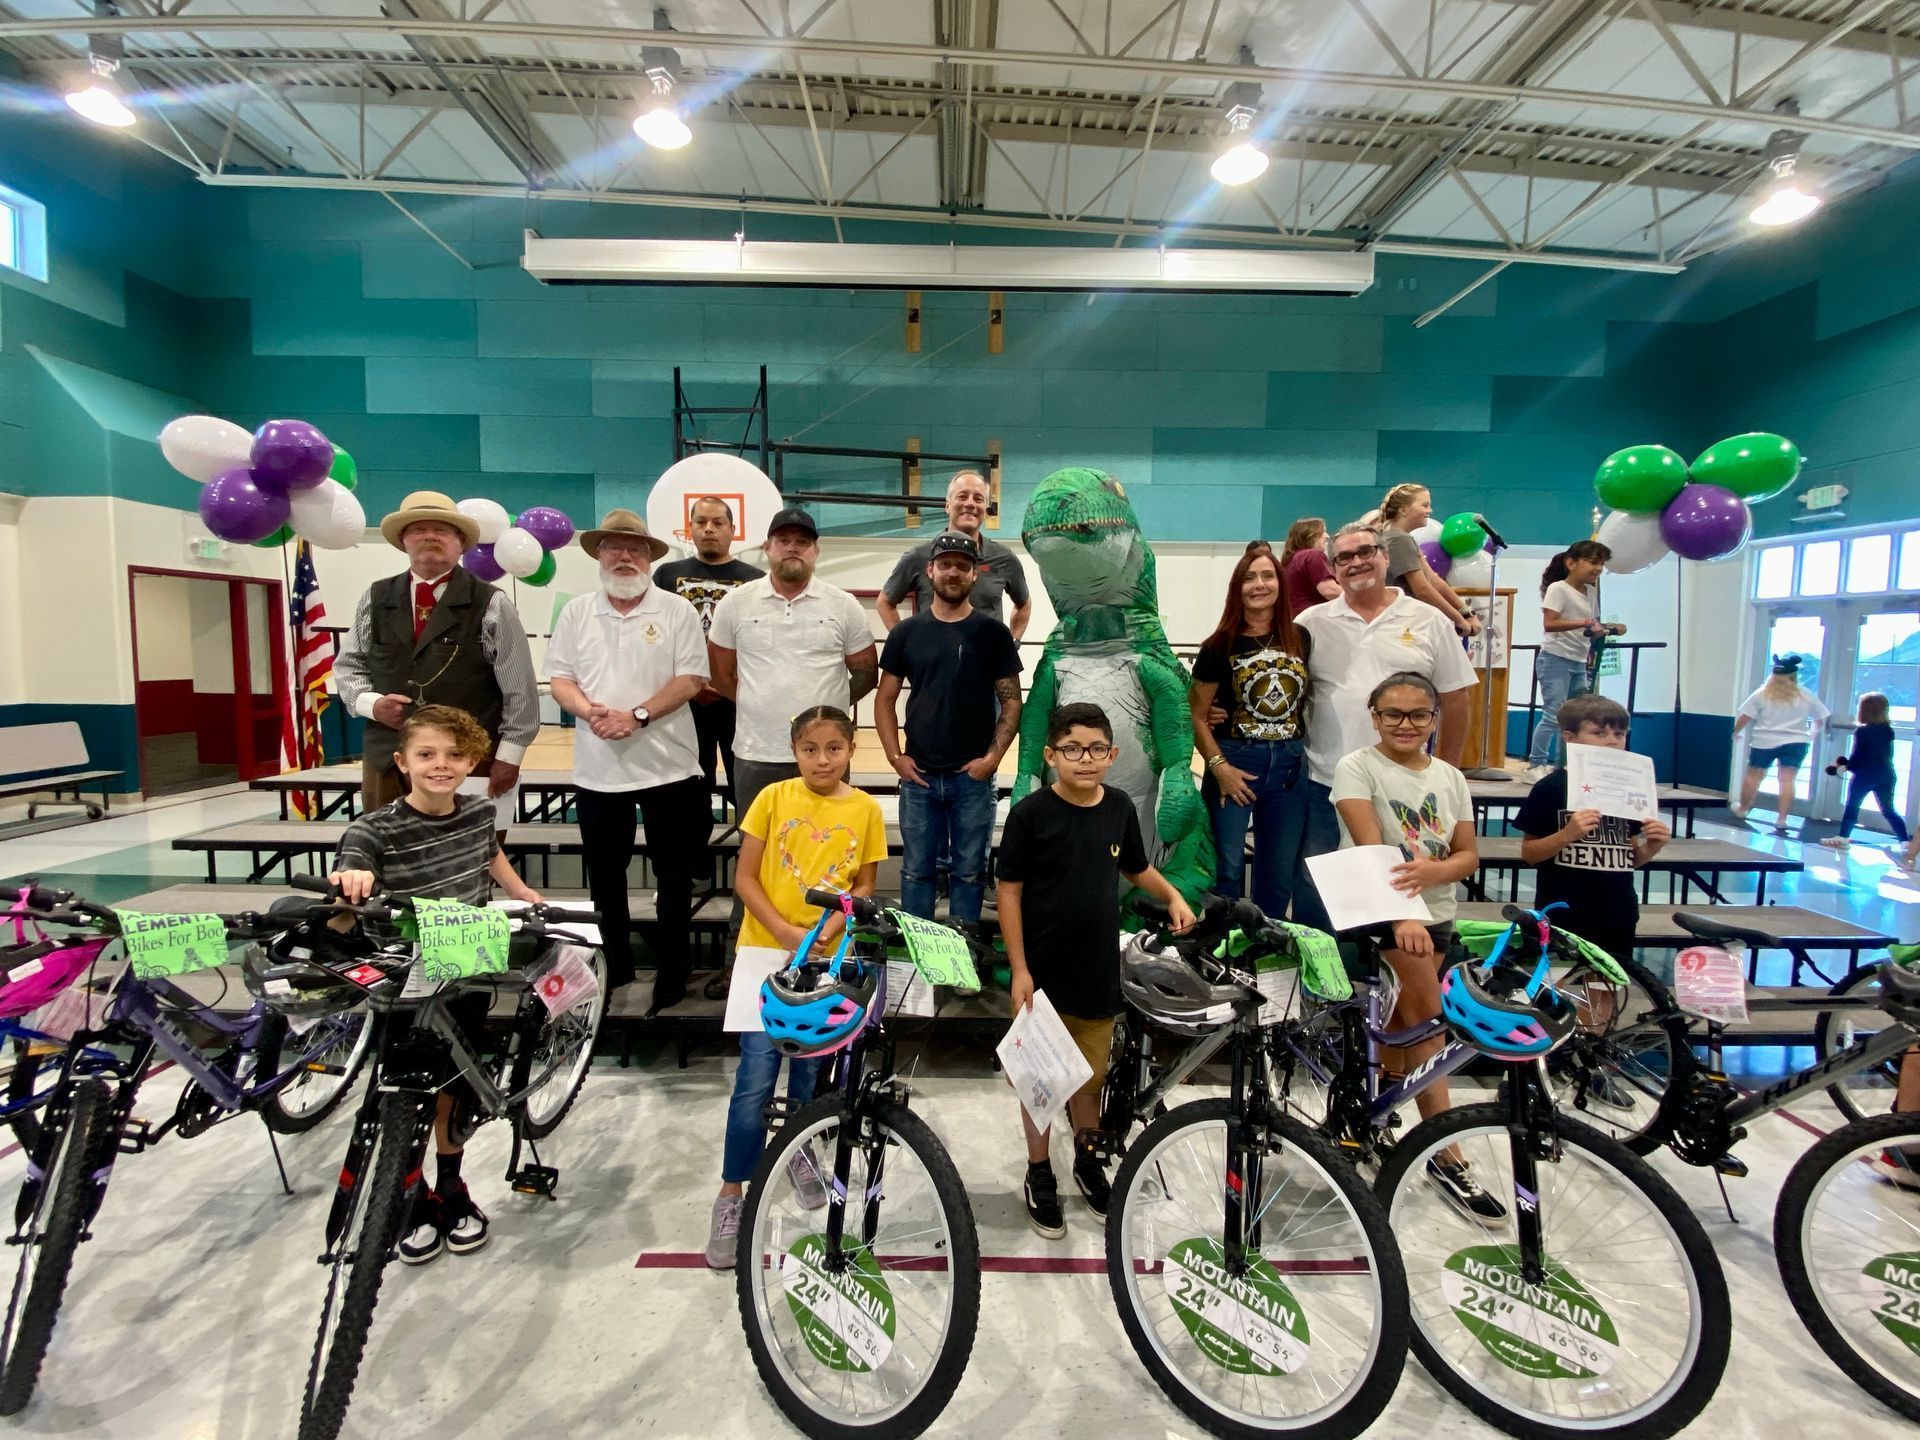 Bike Legal staff and Masonic Lodge of St. George Utah awarding bicycles to students at school